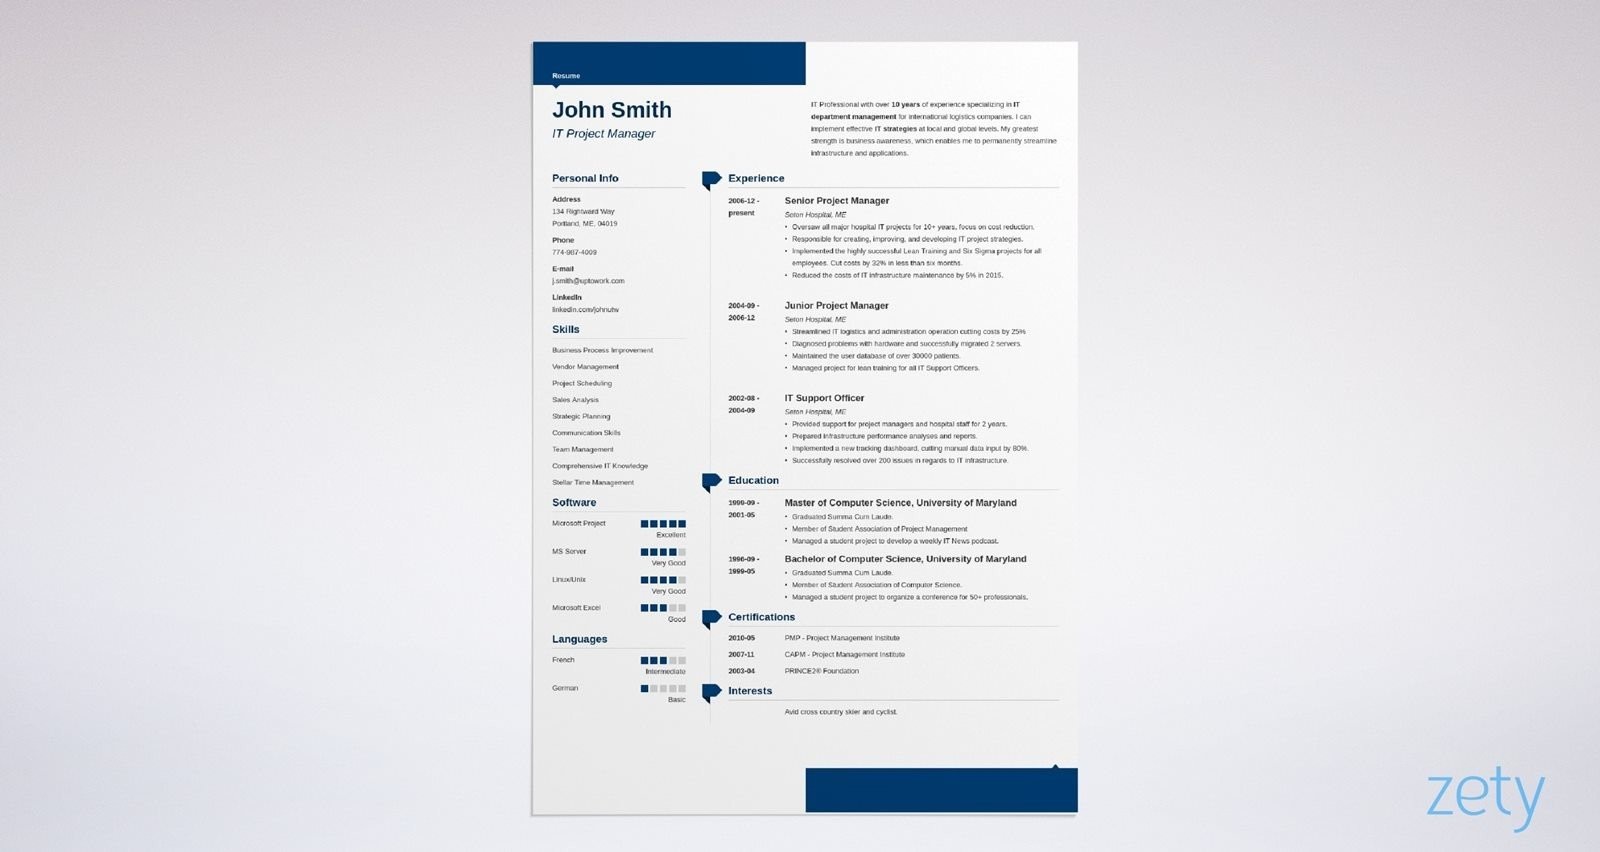 A view from the Zety CV builder displaying how it fills in the job history section plus a collection of pre-crafted resume descriptions proposed for the particular occupation.